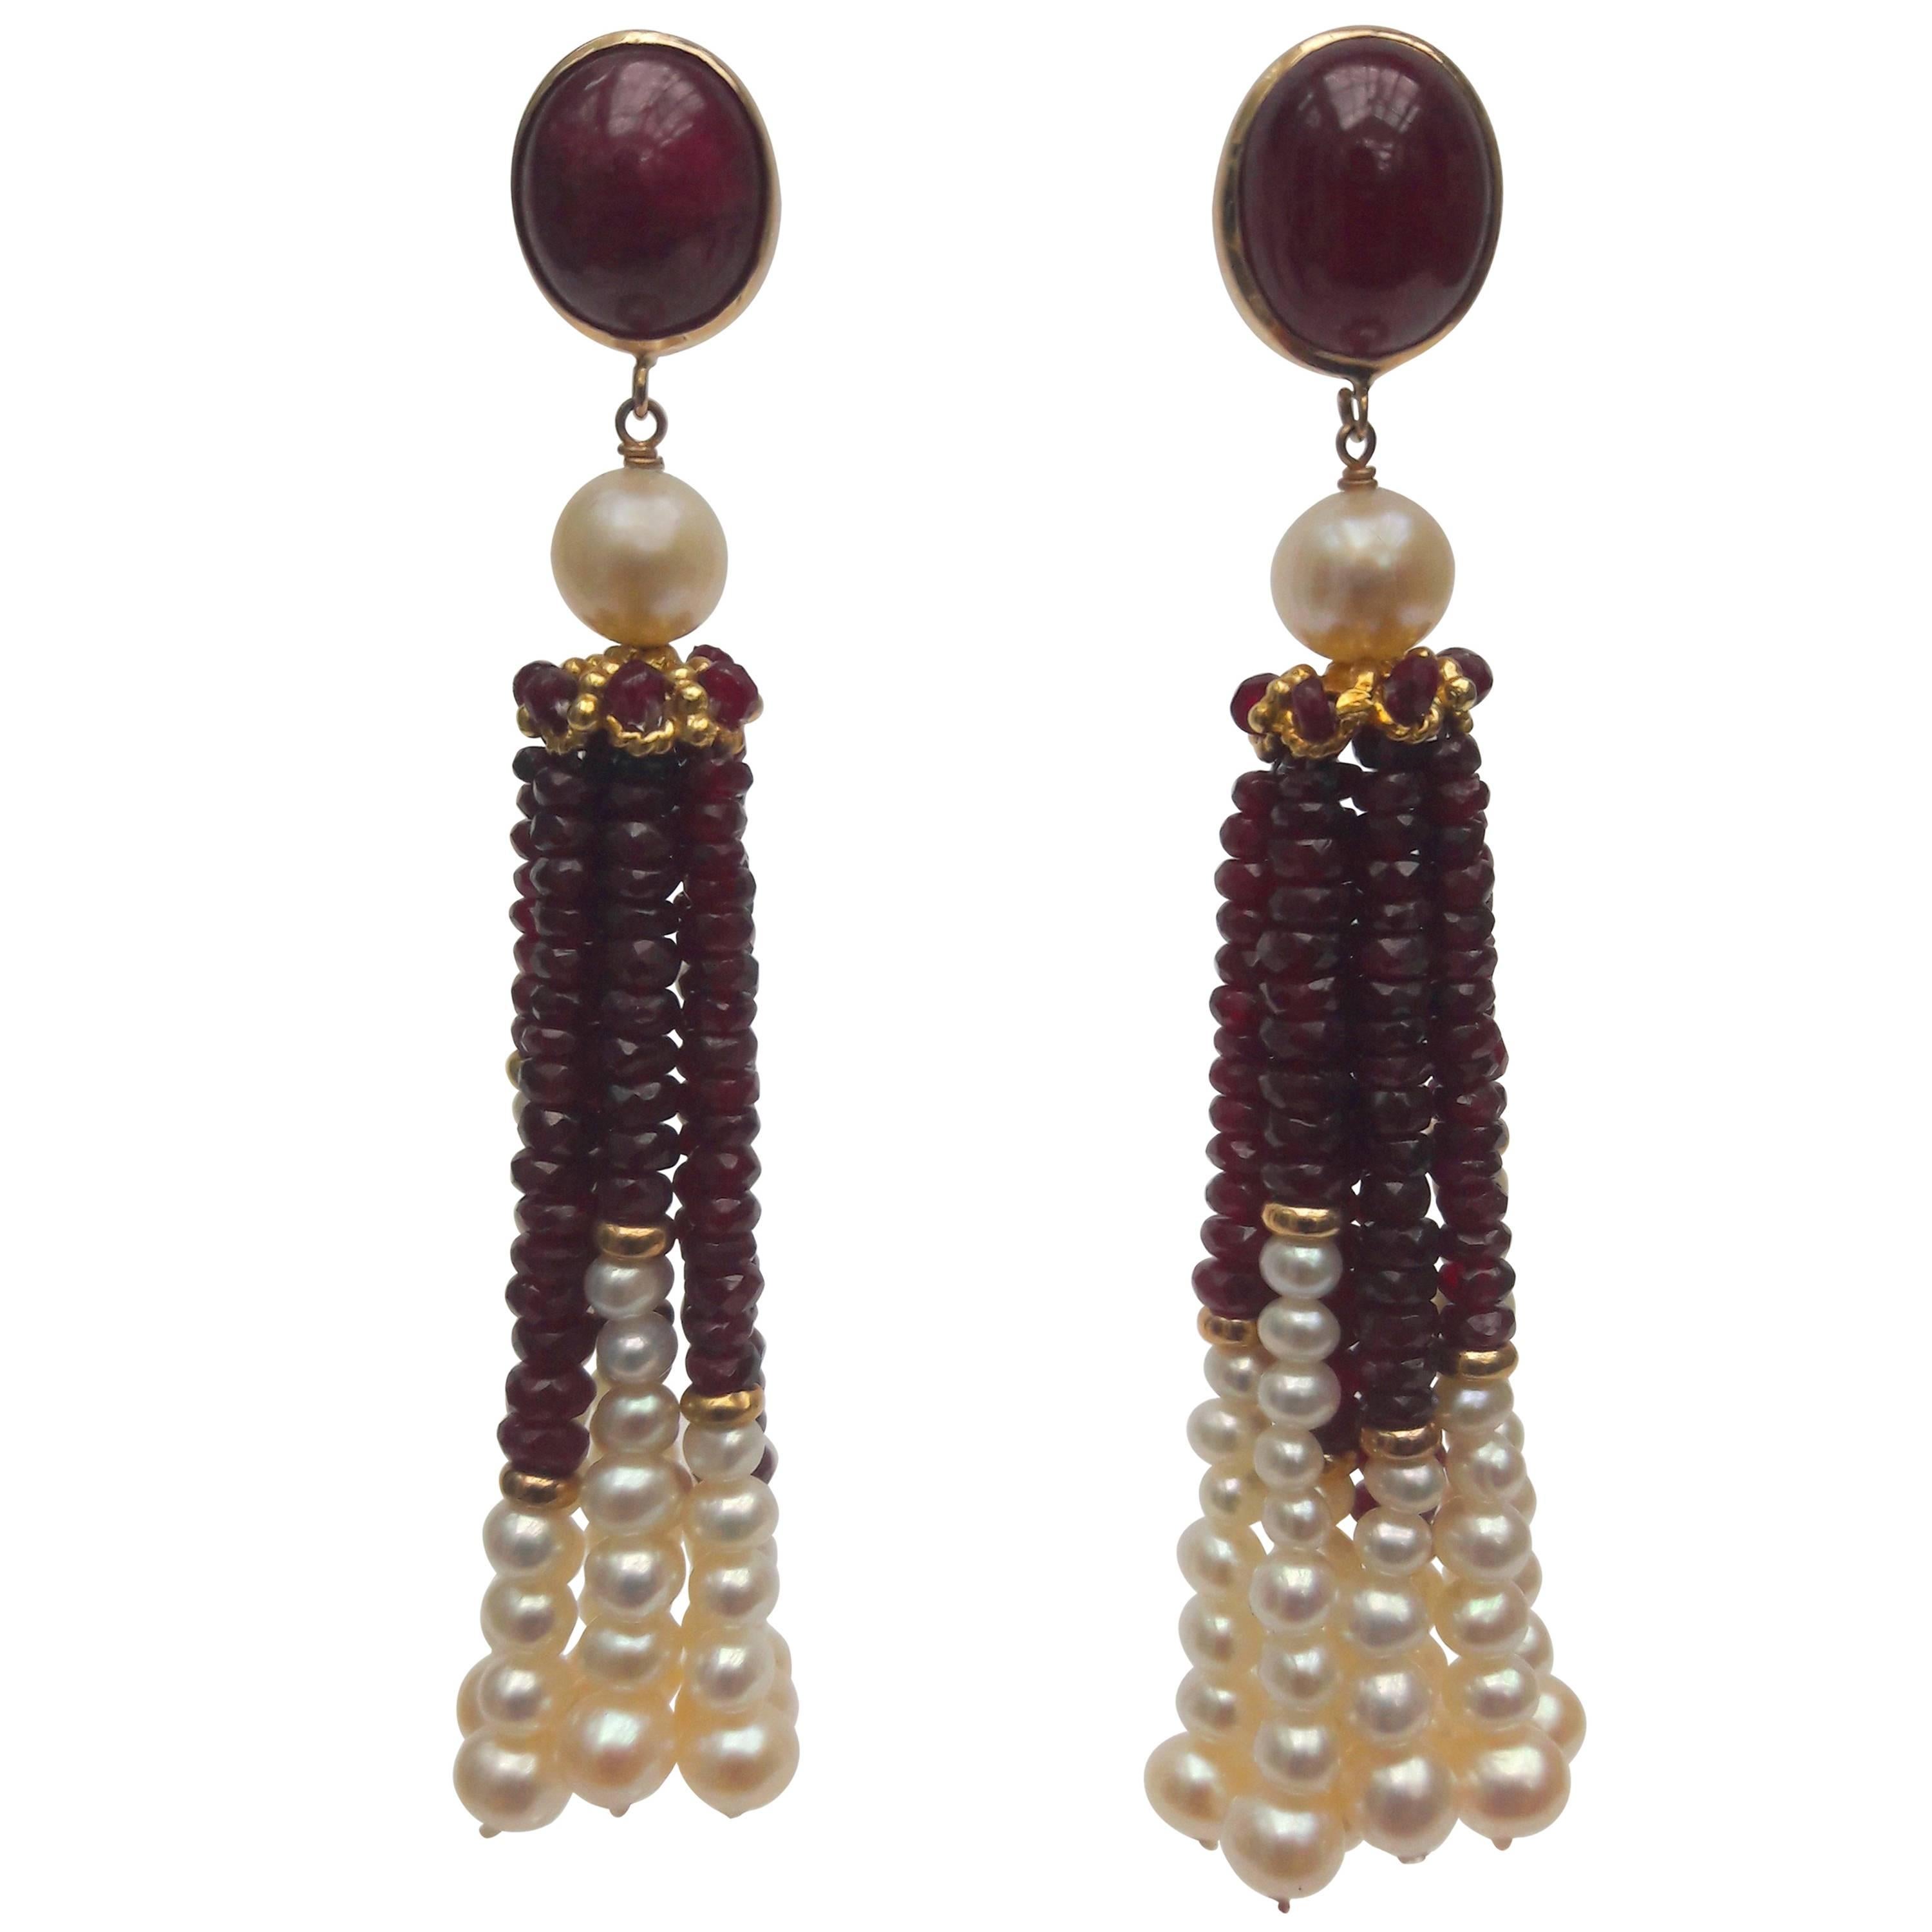 These tassel earrings are composed of faceted ruby beads and graduated white pearls (1.5 mm- 4 mm), divided by a 14 K yellow gold roundels. The tassels dangle from a filigree 14 k yellow gold cap, decorated with tiny faceted ruby beads. Atop the cap